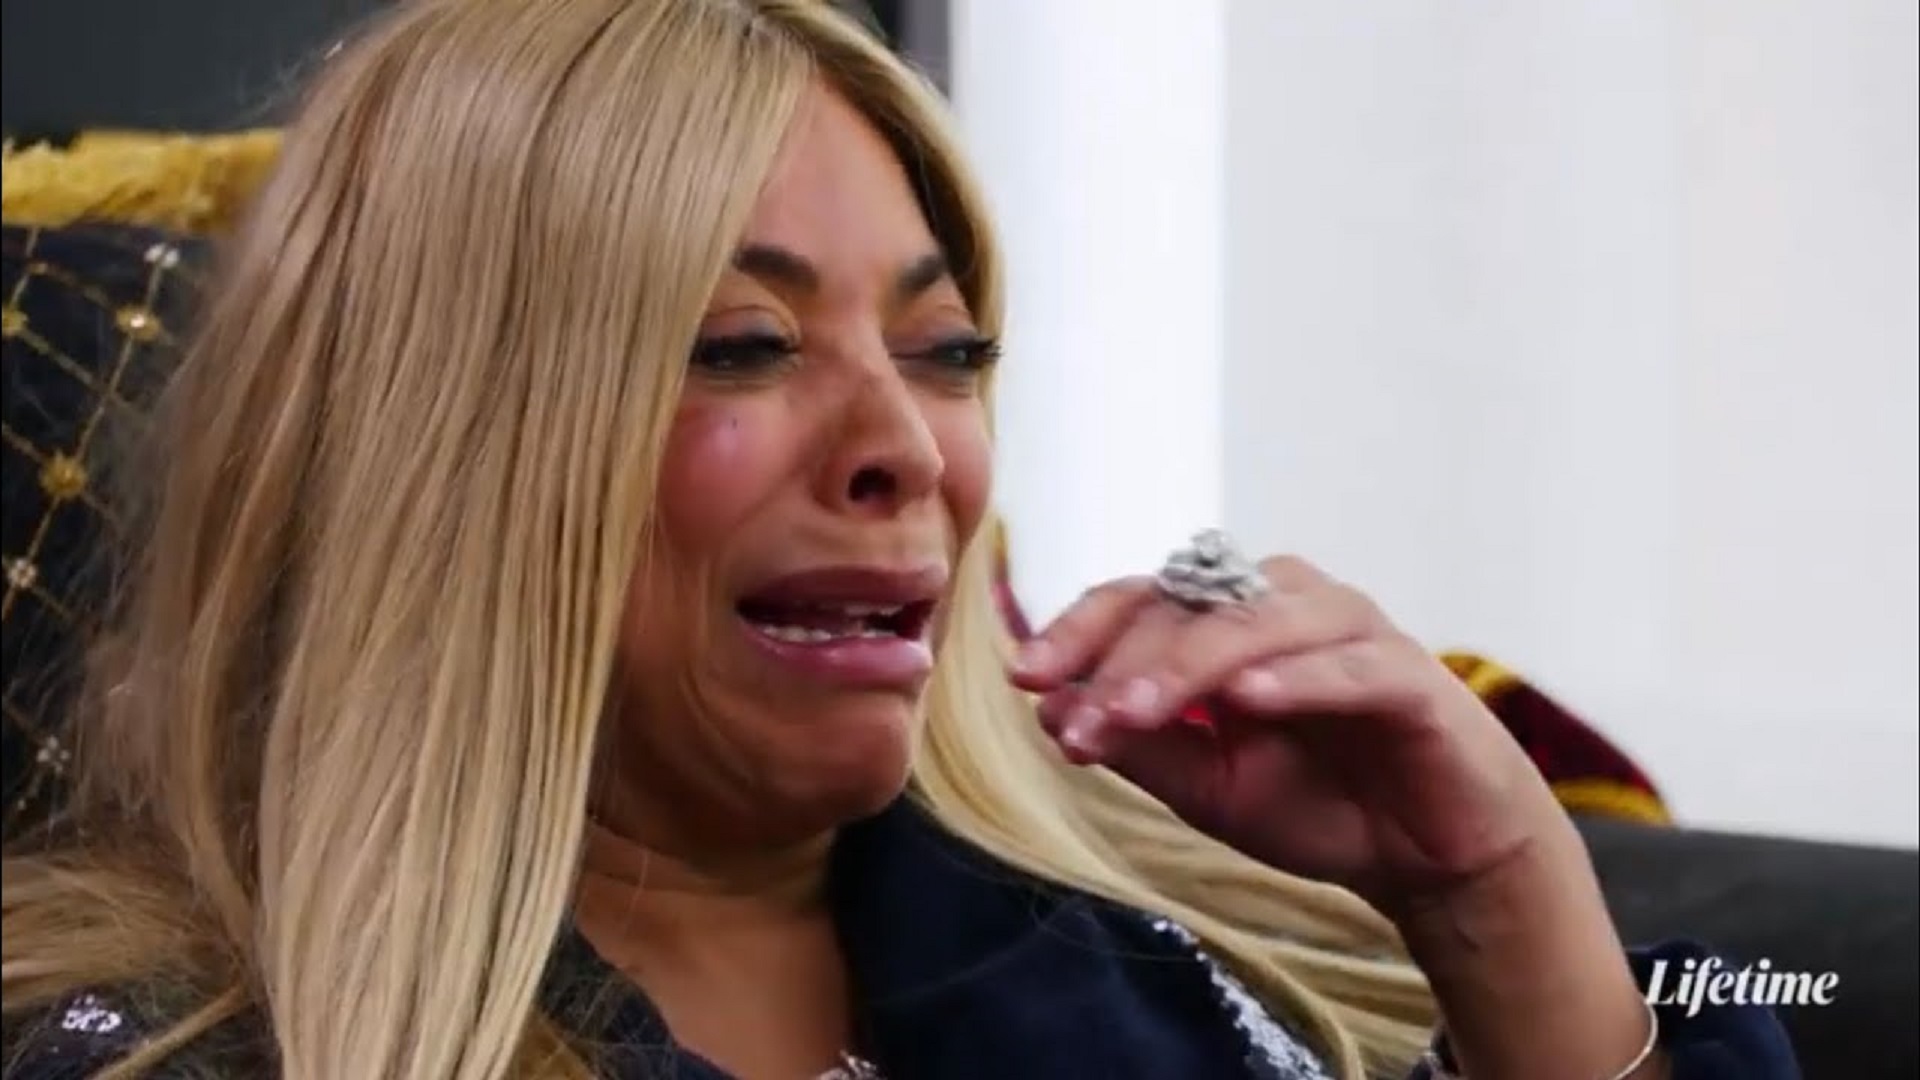 Raw & Real: Watch The Trailer For ‘Wendy Williams: What A Mess!’ Documentary